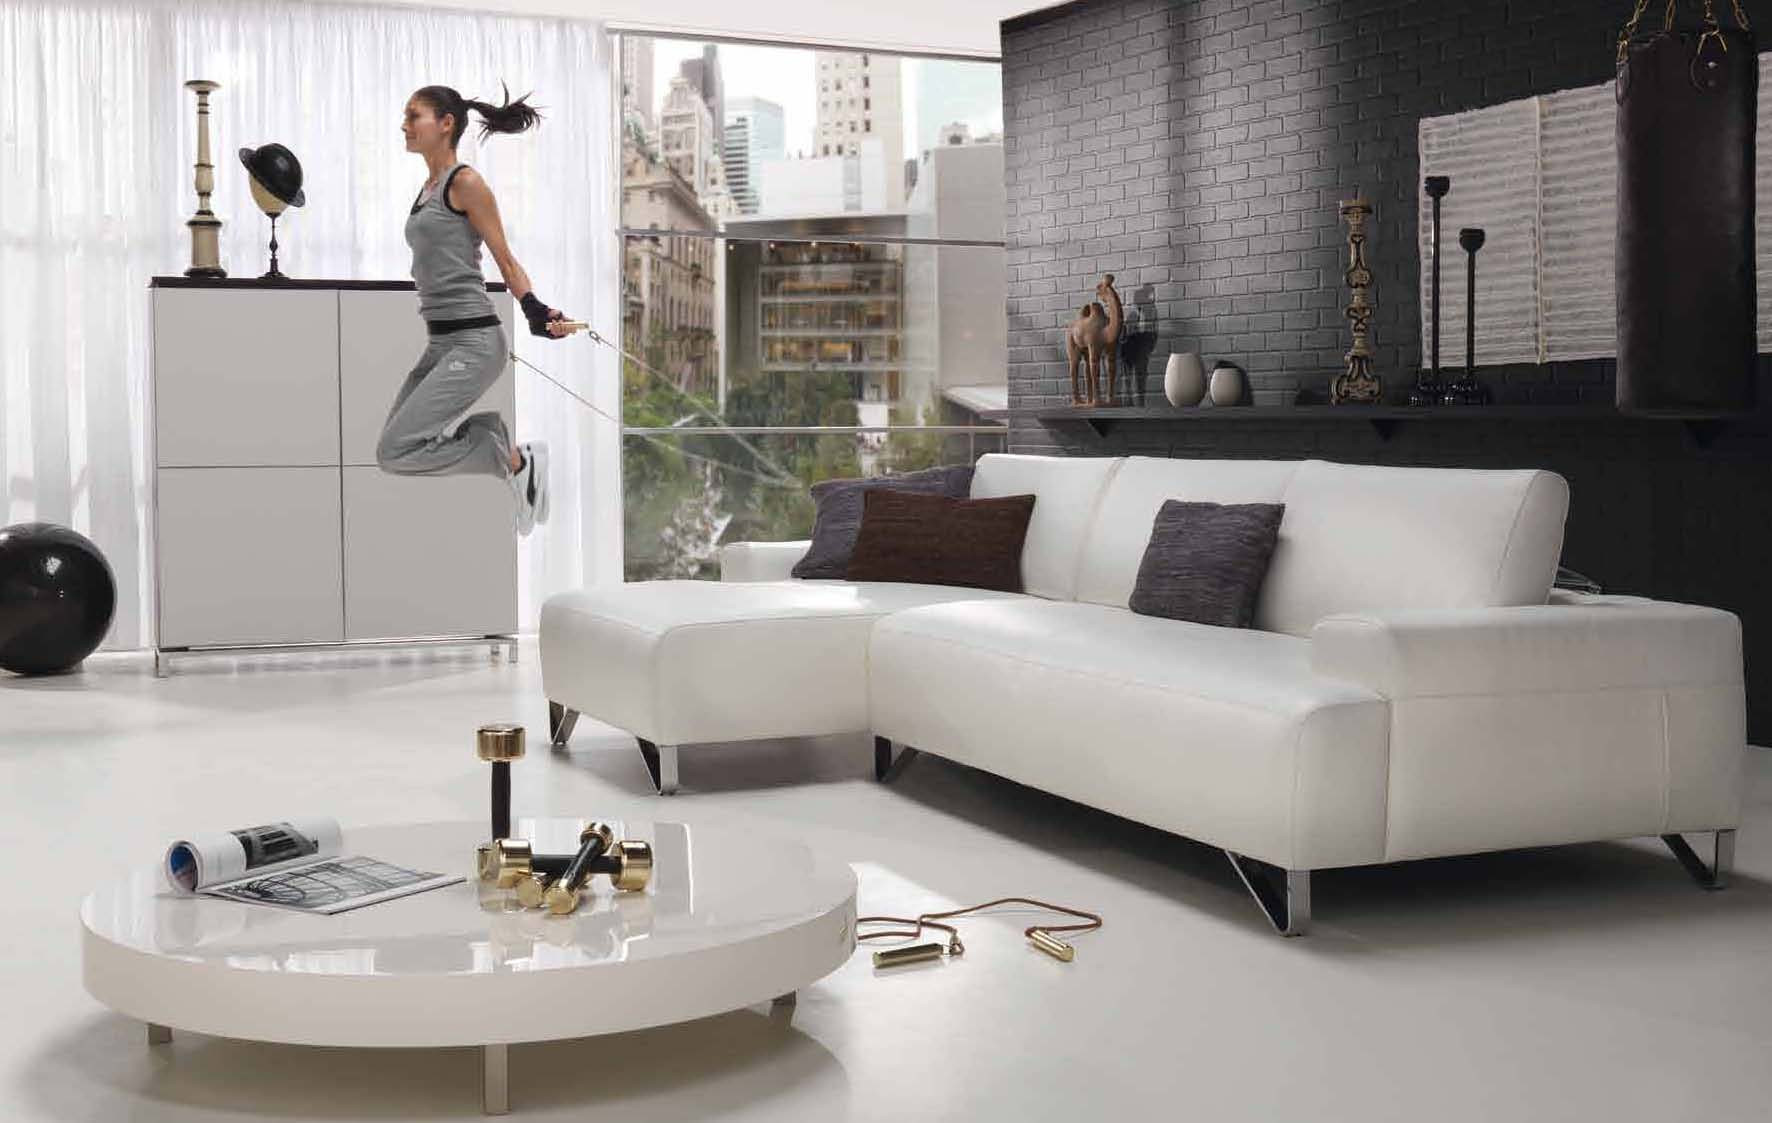 White Living Room Furniture Ideas
 15 Awesome White Living Room Furniture For Your Living Space